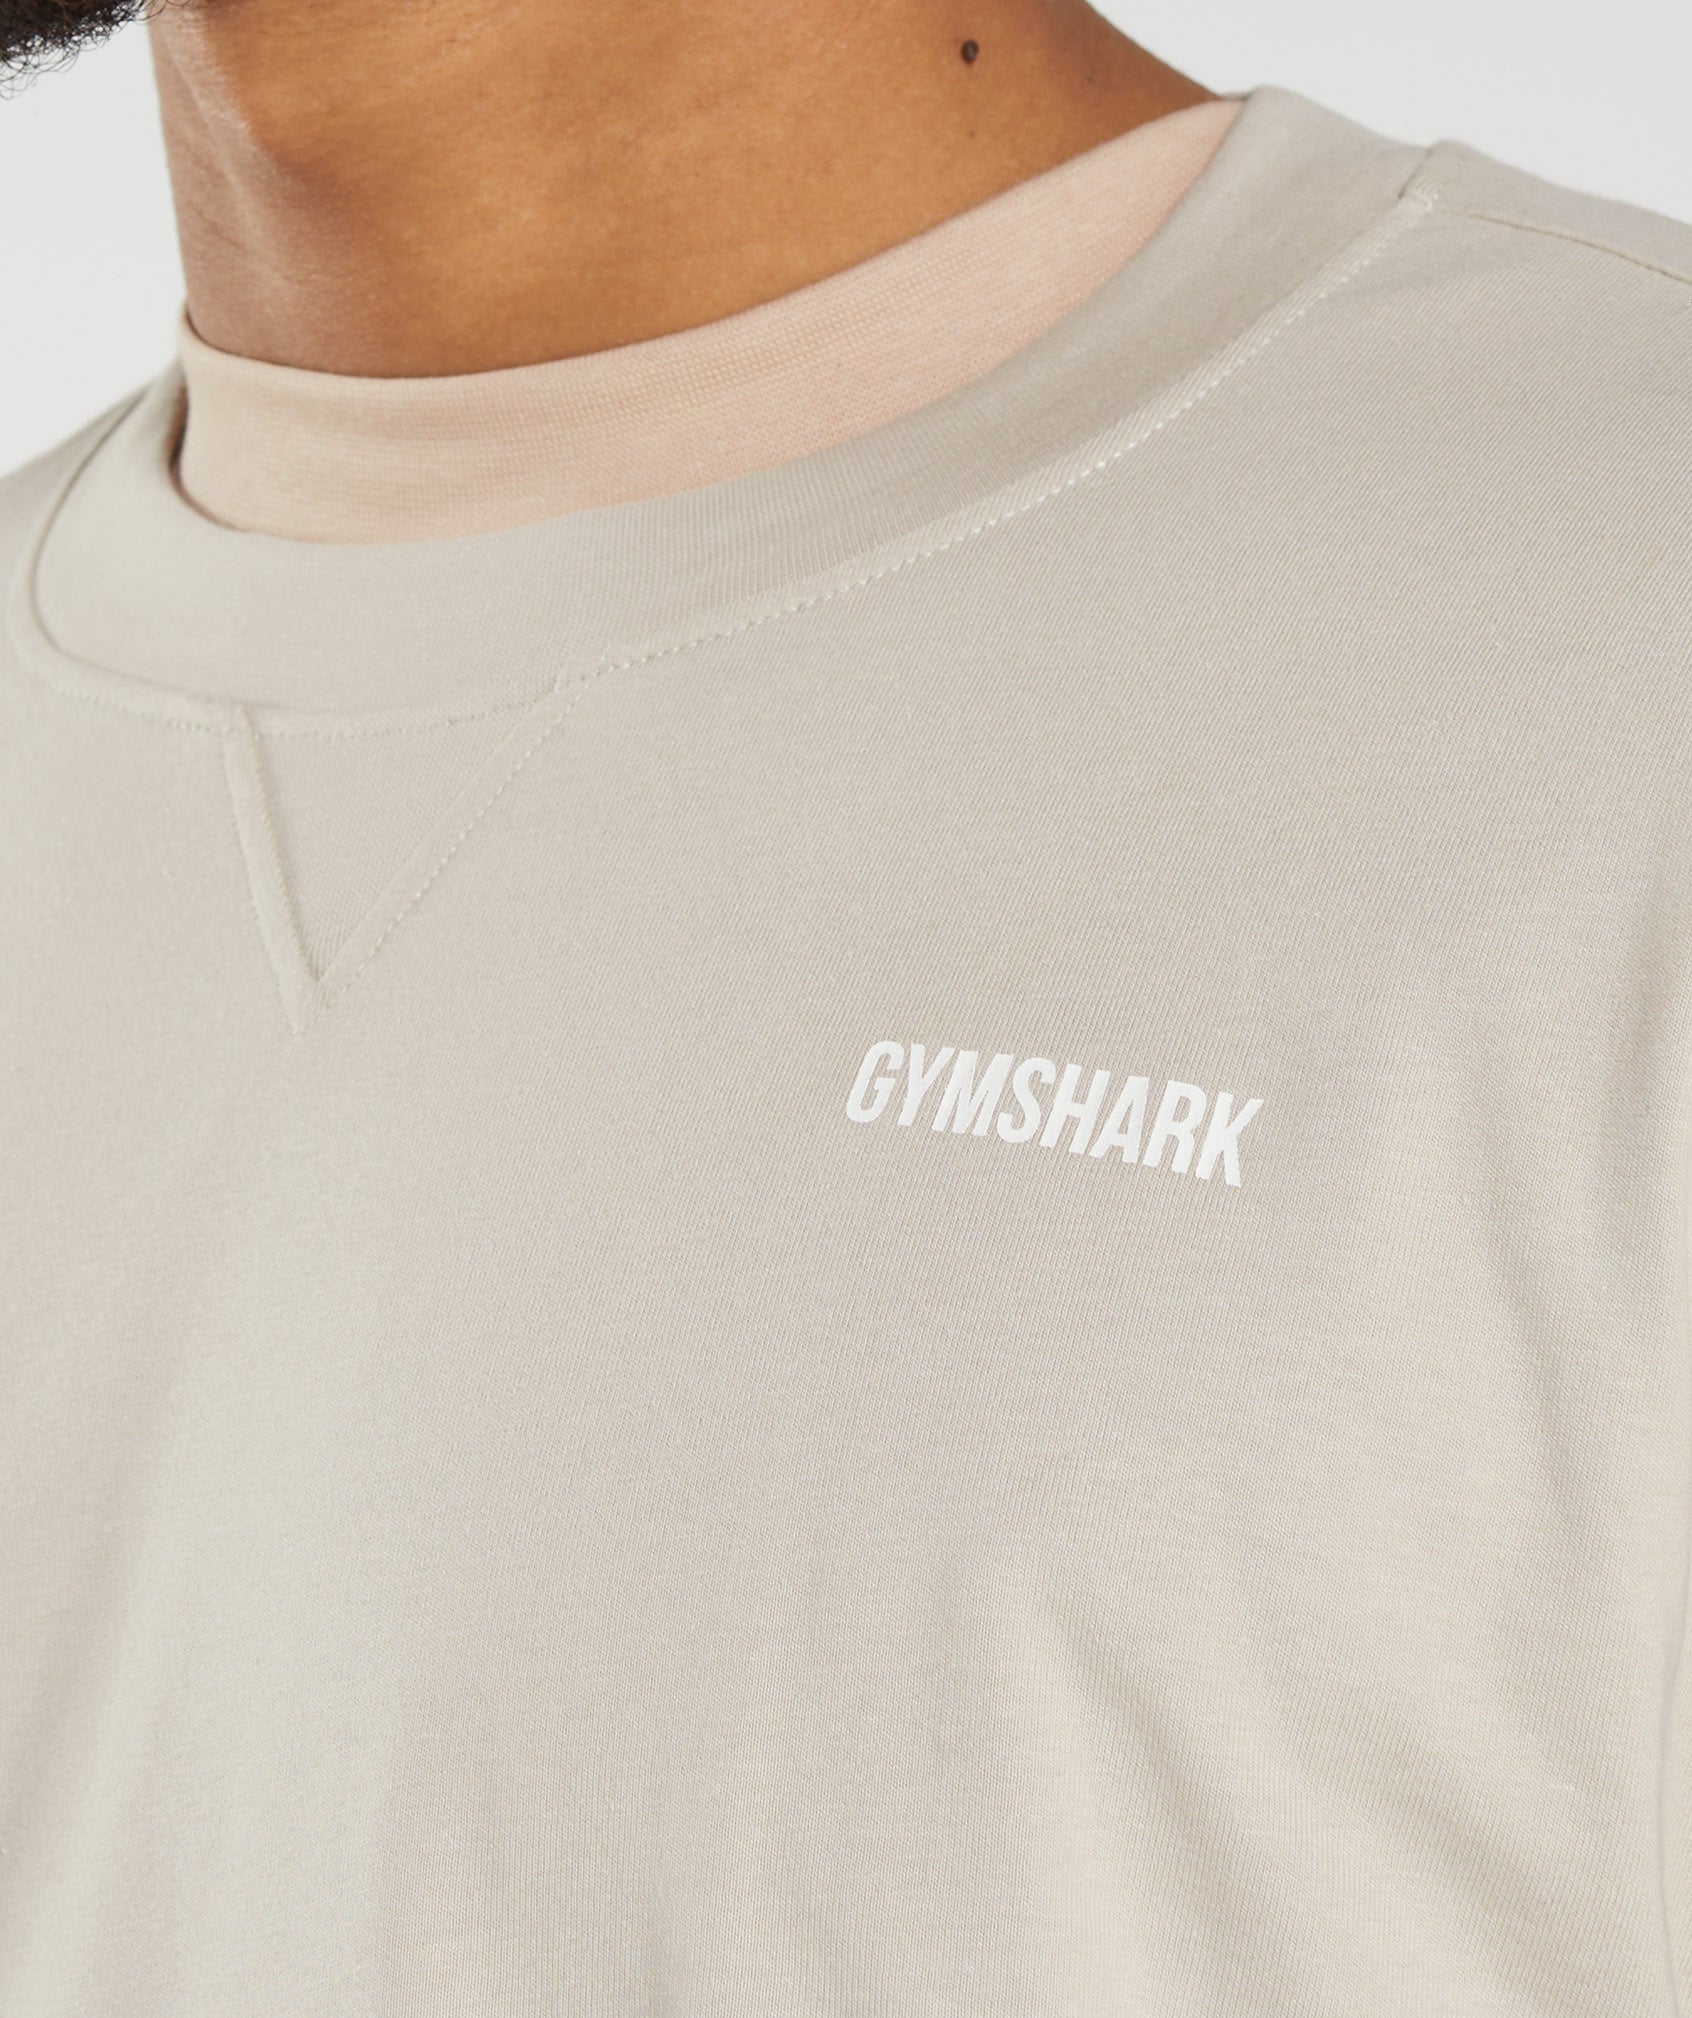 Rest Day Sweats Long Sleeve T-Shirt in Pebble Grey - view 6